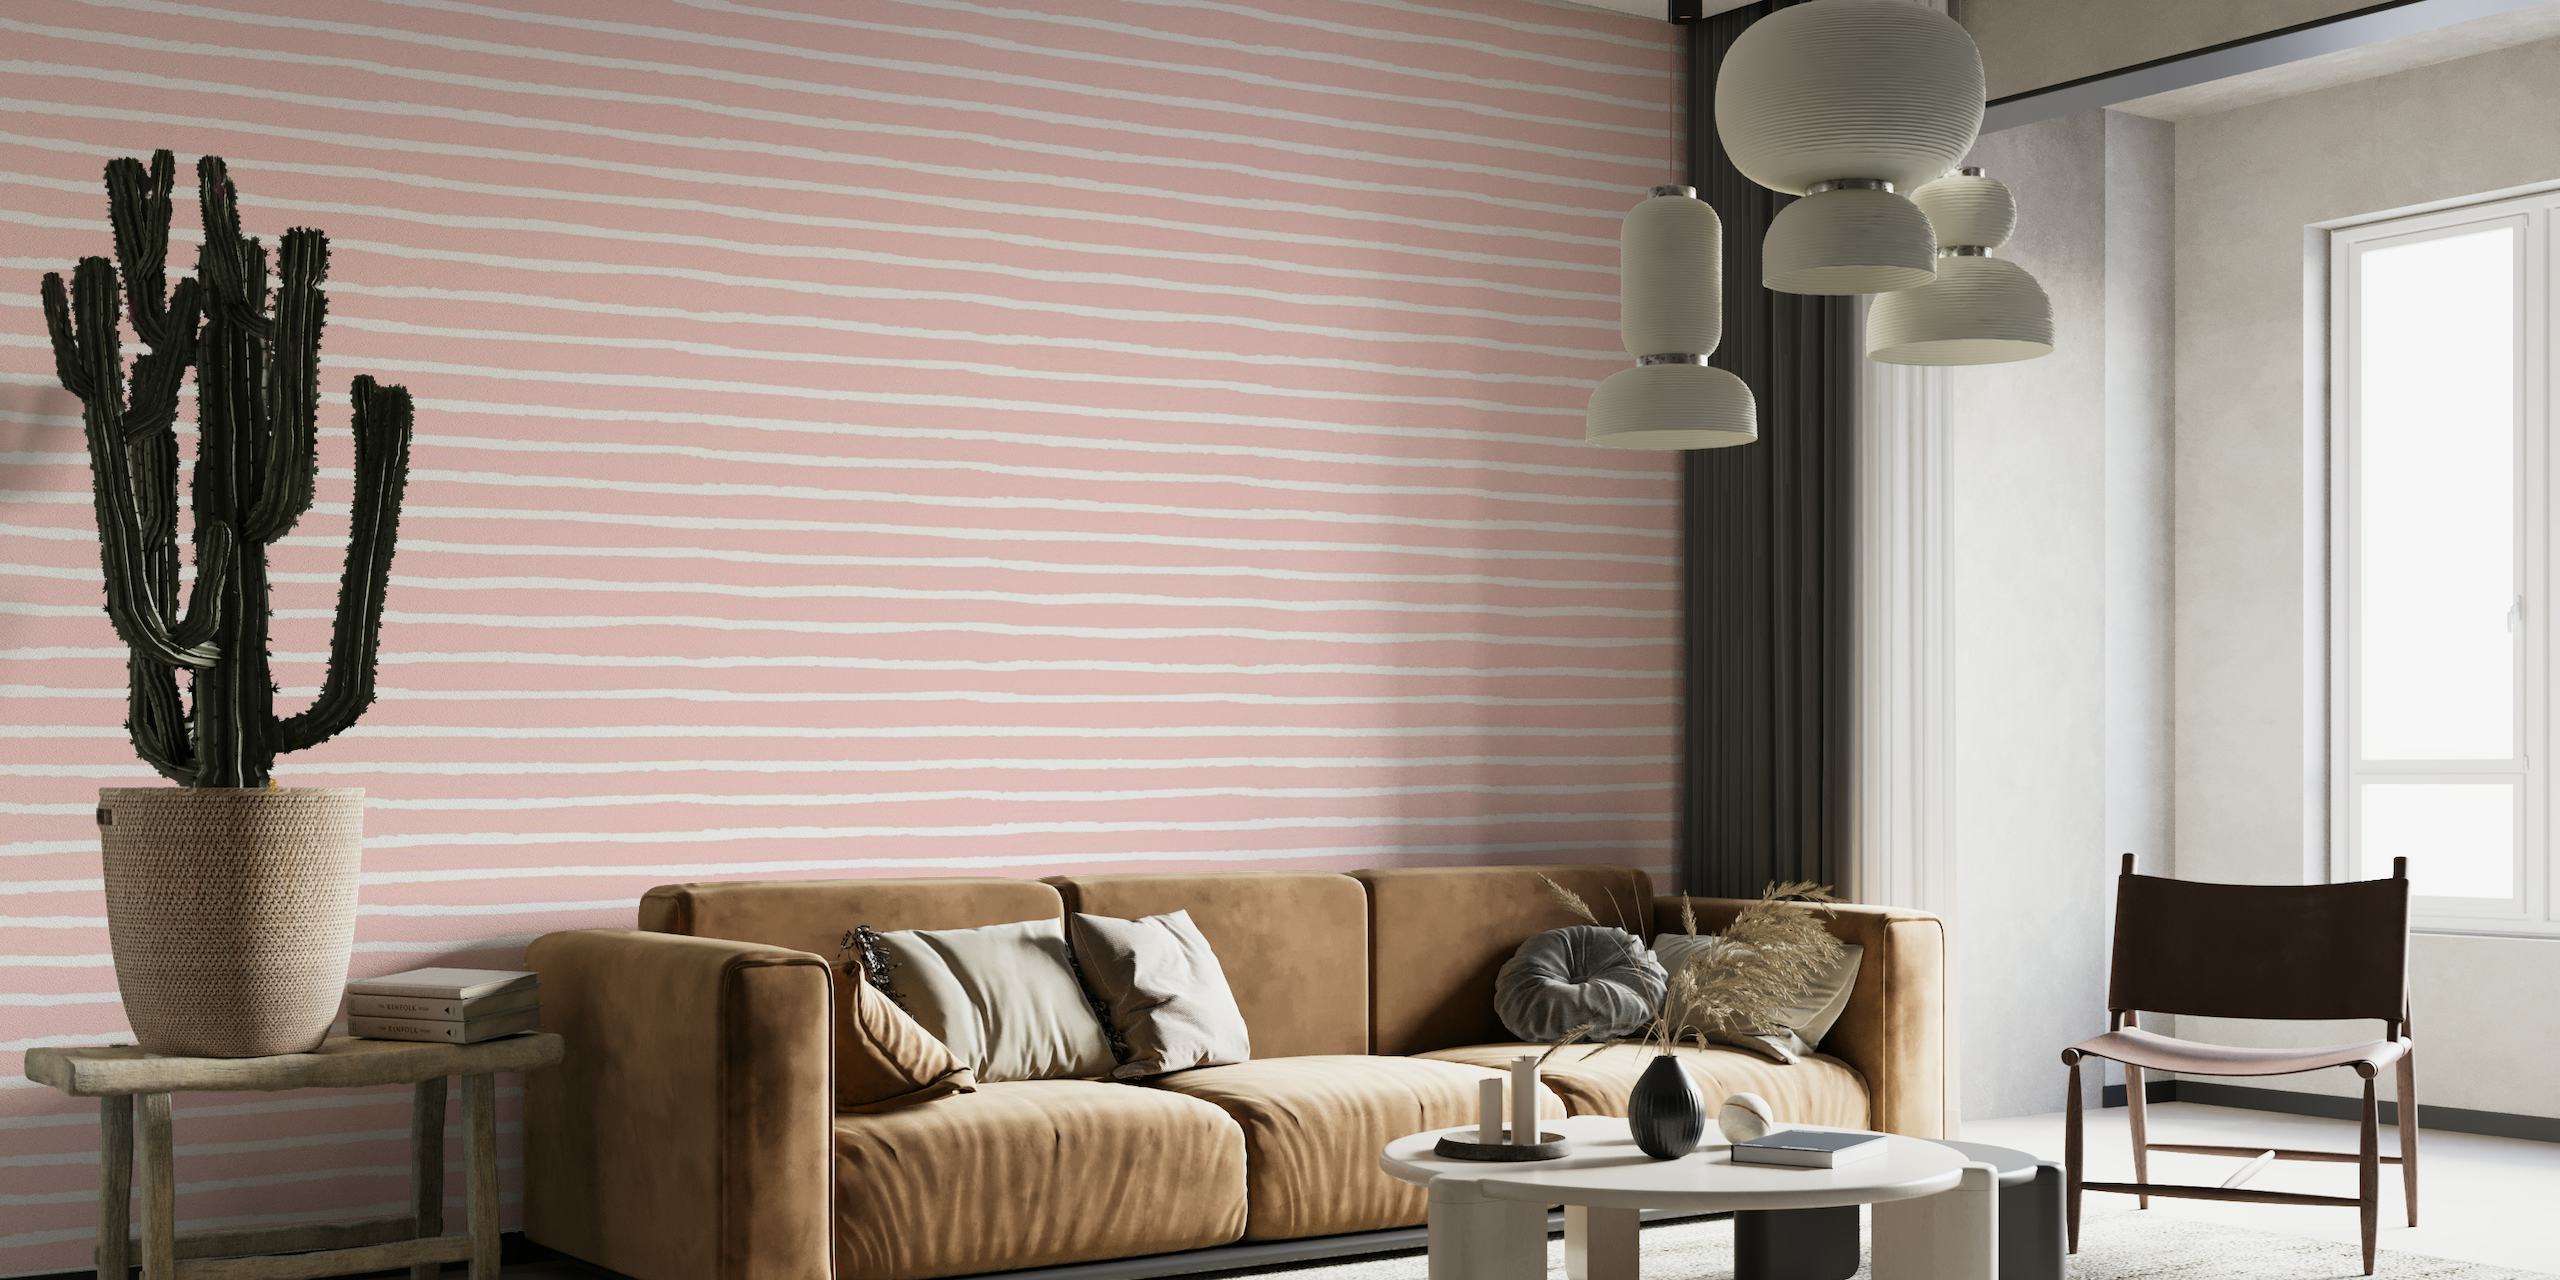 Abstract Stripes_pink wallpaper